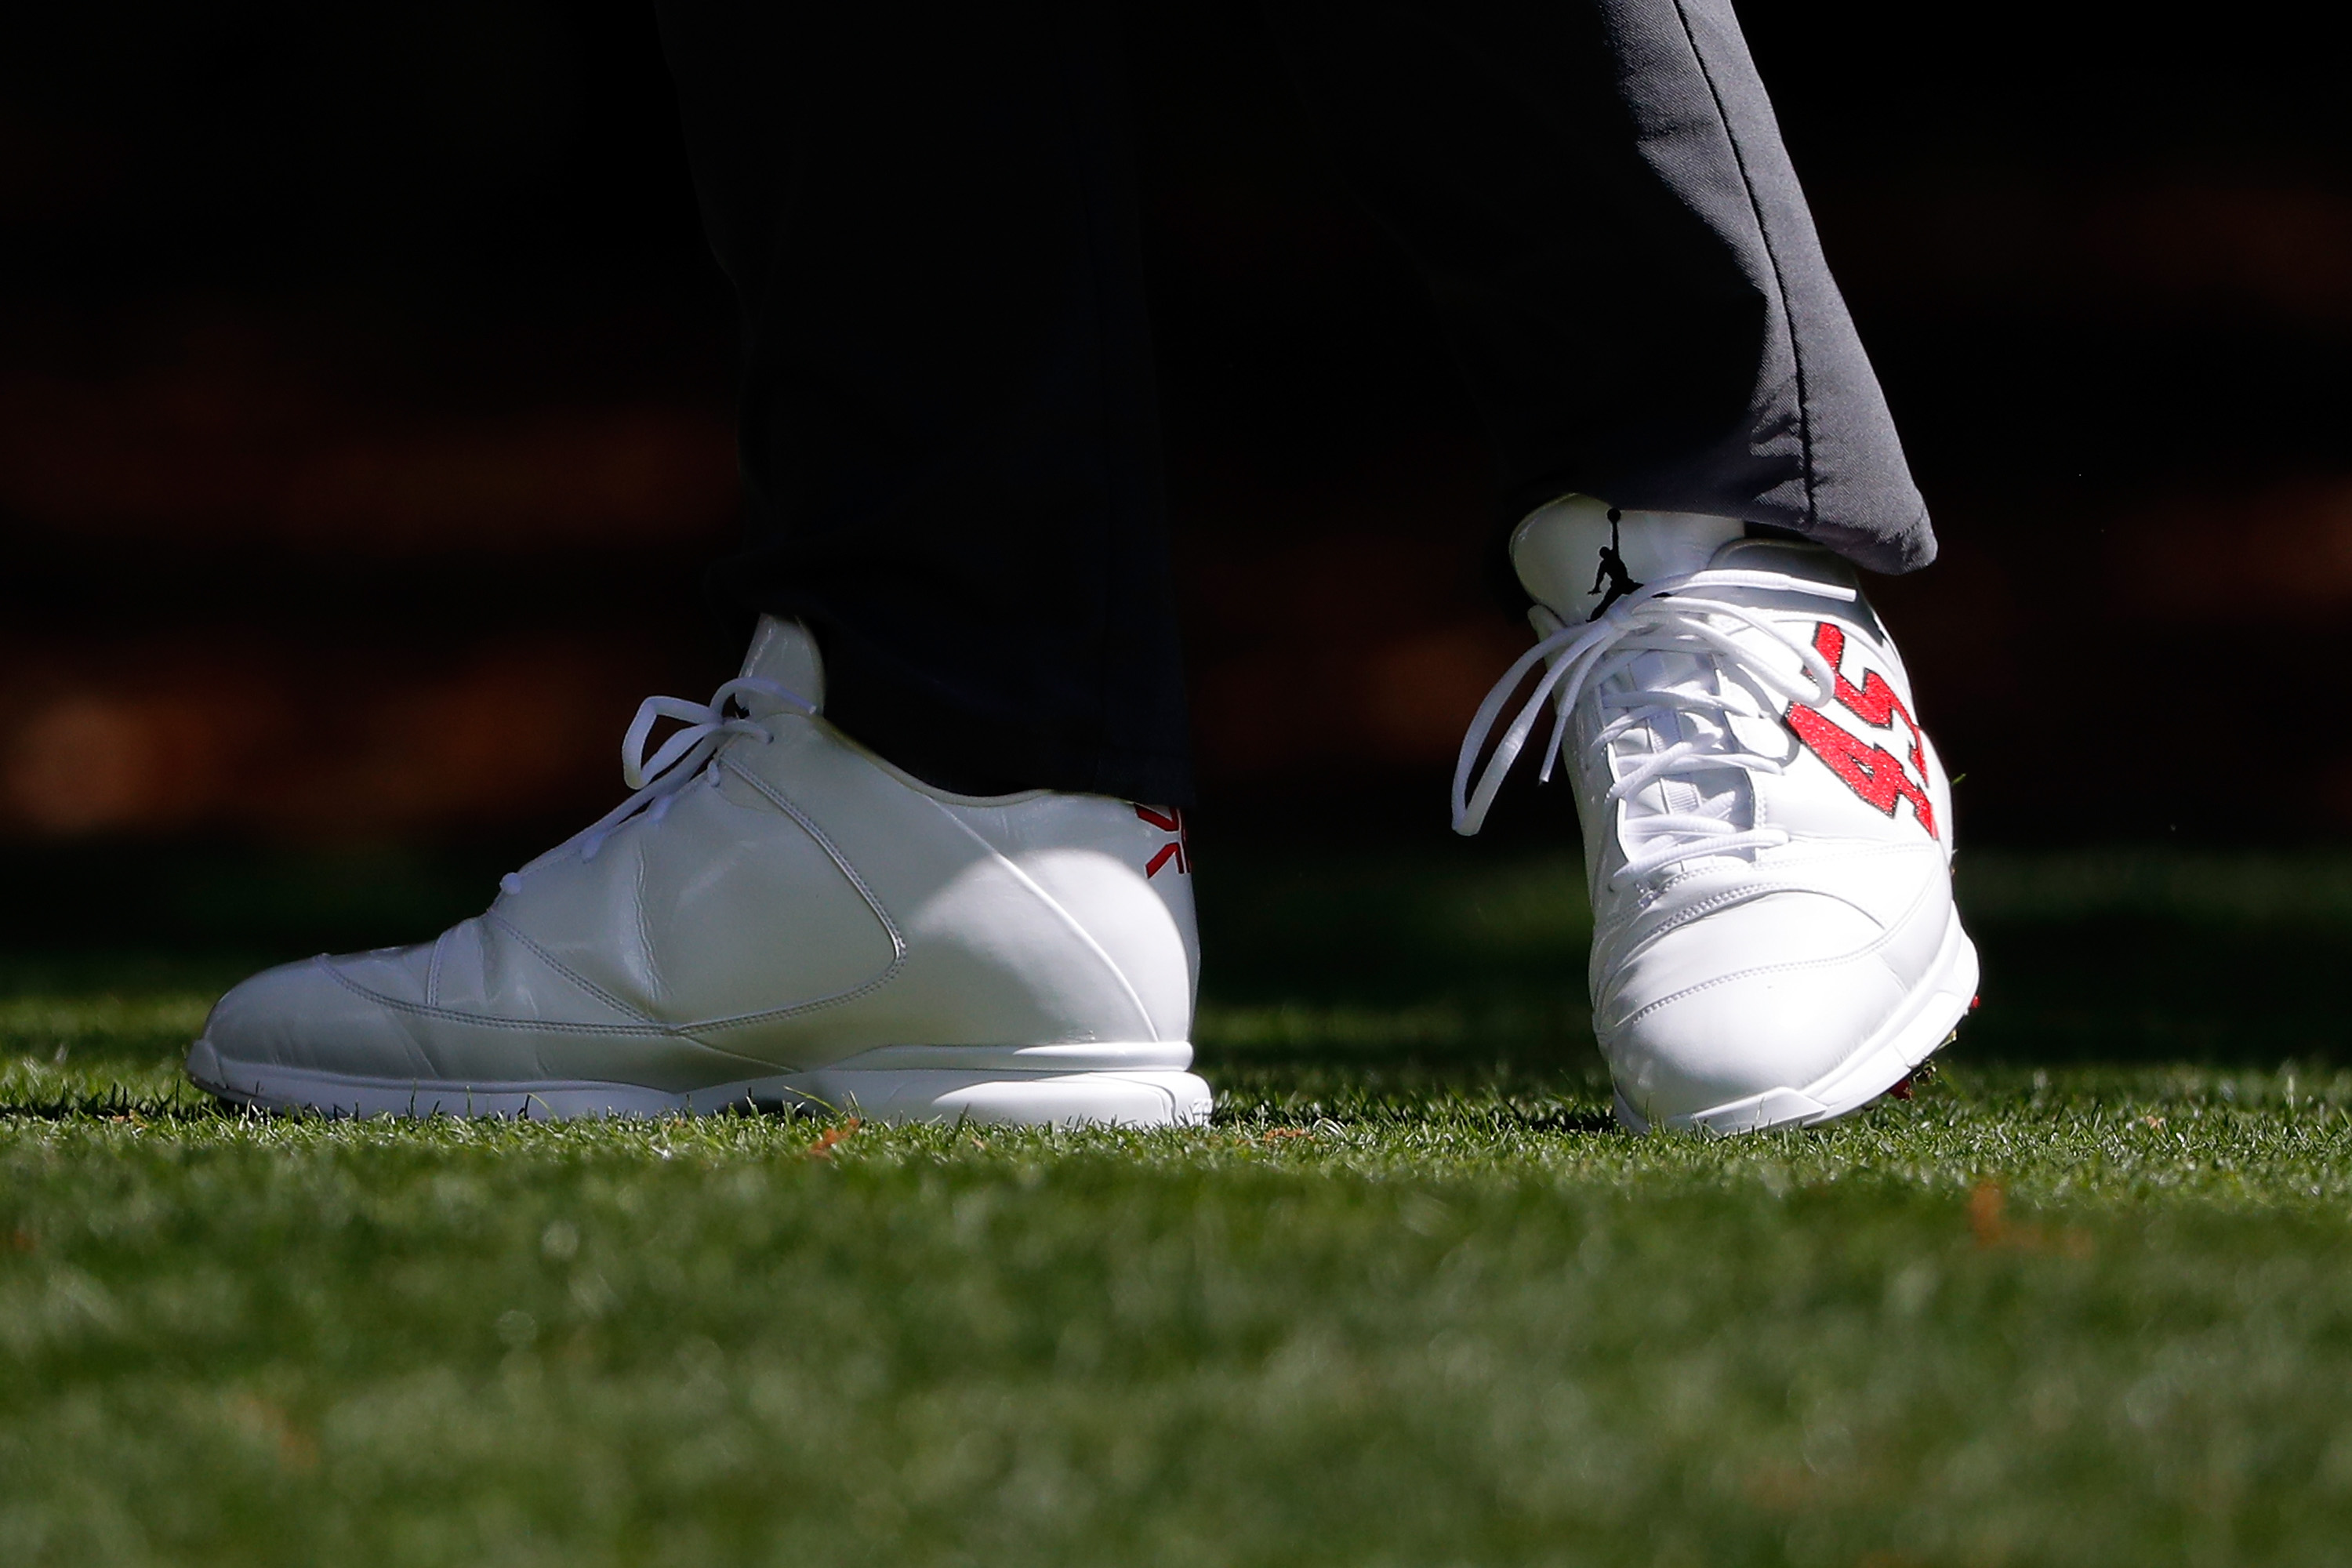 Keegan Bradley is rocking an awesome pair of Jordan golf shoes at the ...